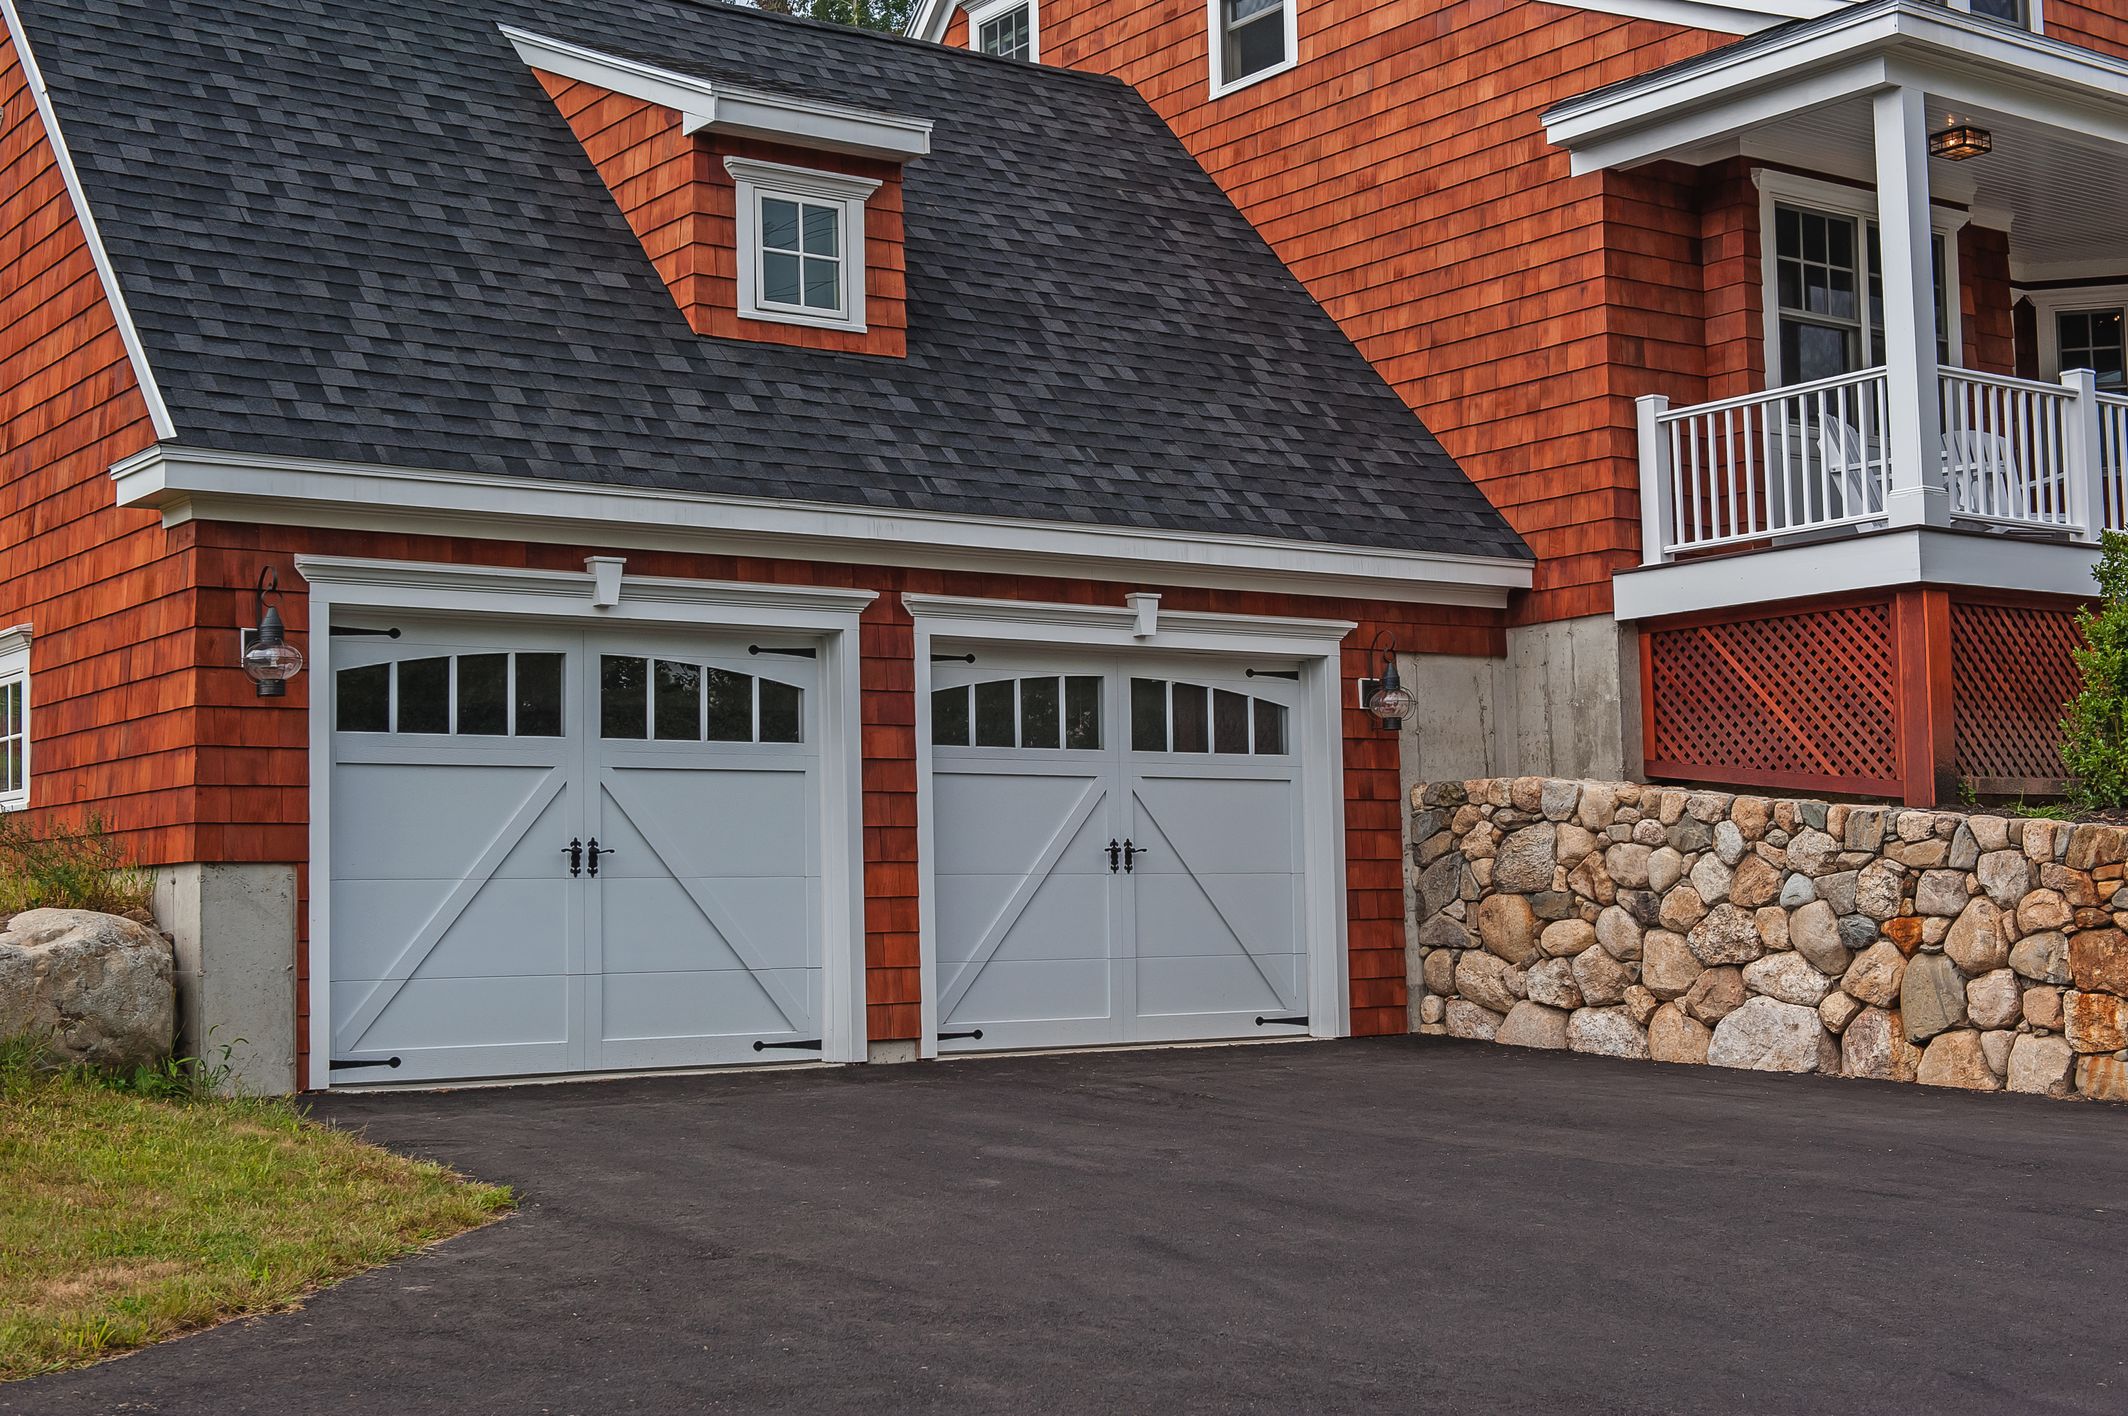 fiberglass garage doors with arched windows white by chi ohd